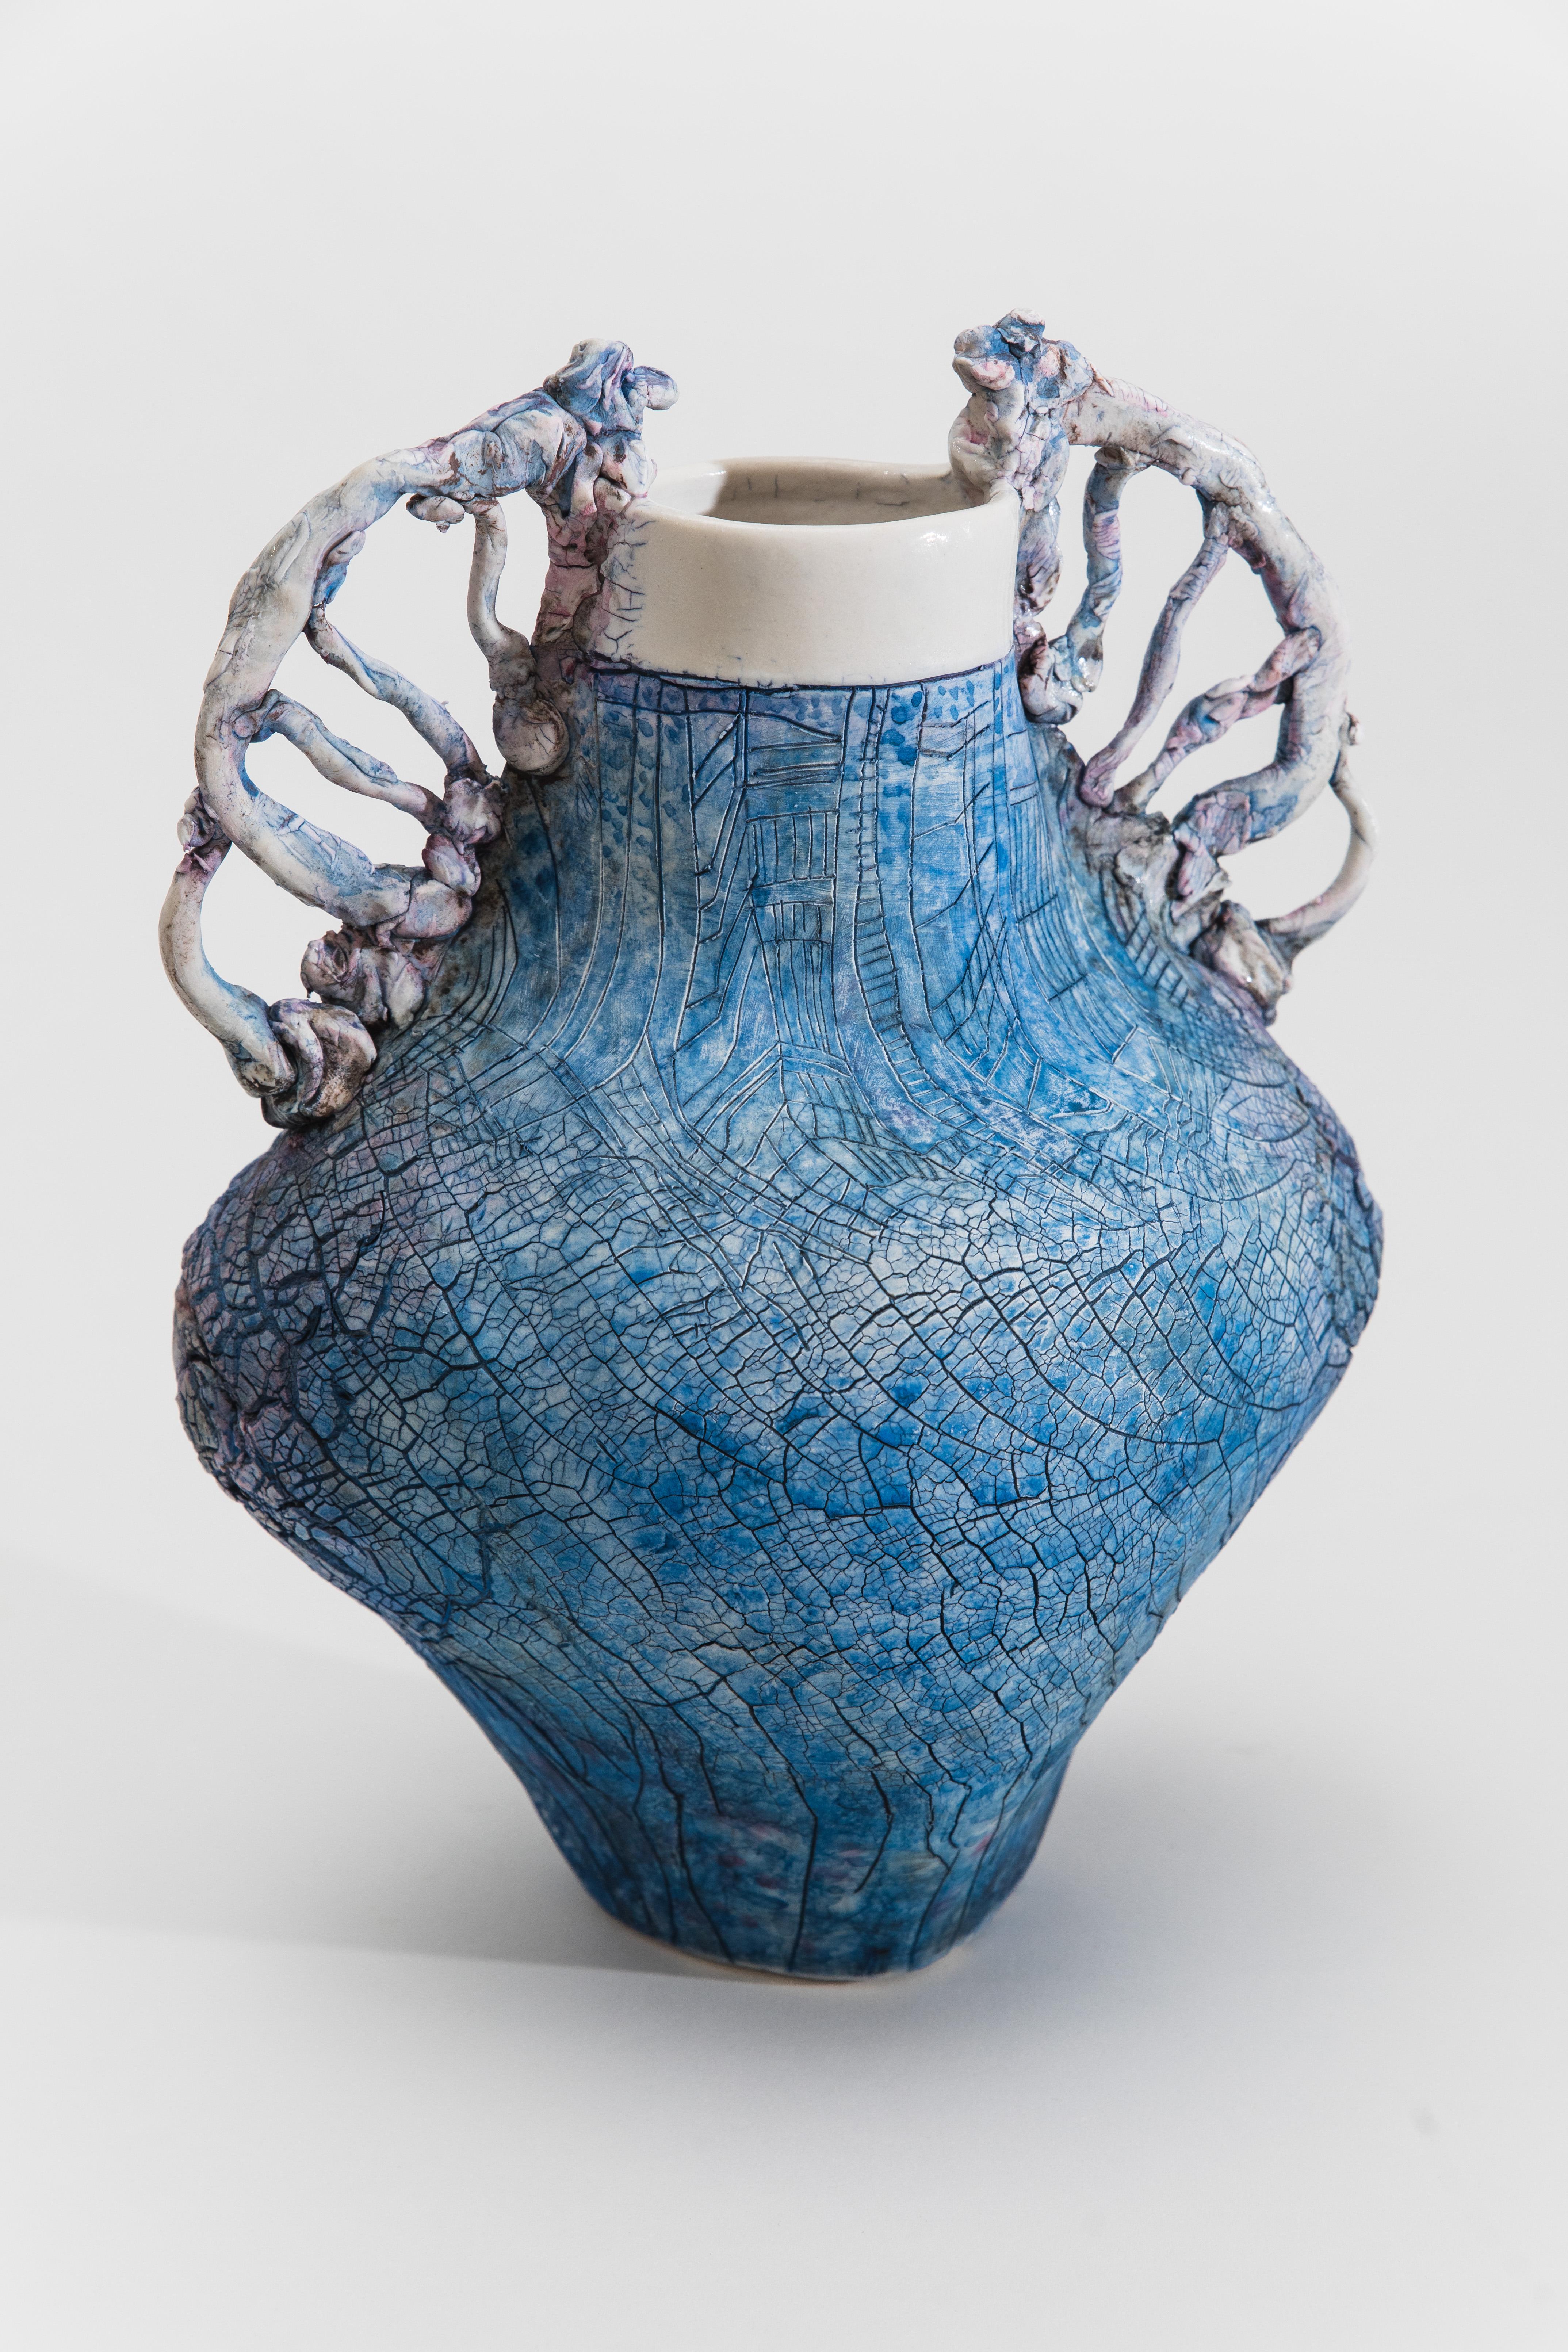 Mindy Horn’s non-functional vessels, purposely thrown off center, appear to have grown and weathered organically. The surfaces of the vessels, crusty or cracked, emphasize their crooked, uneven forms. While their appearance seems to contradict